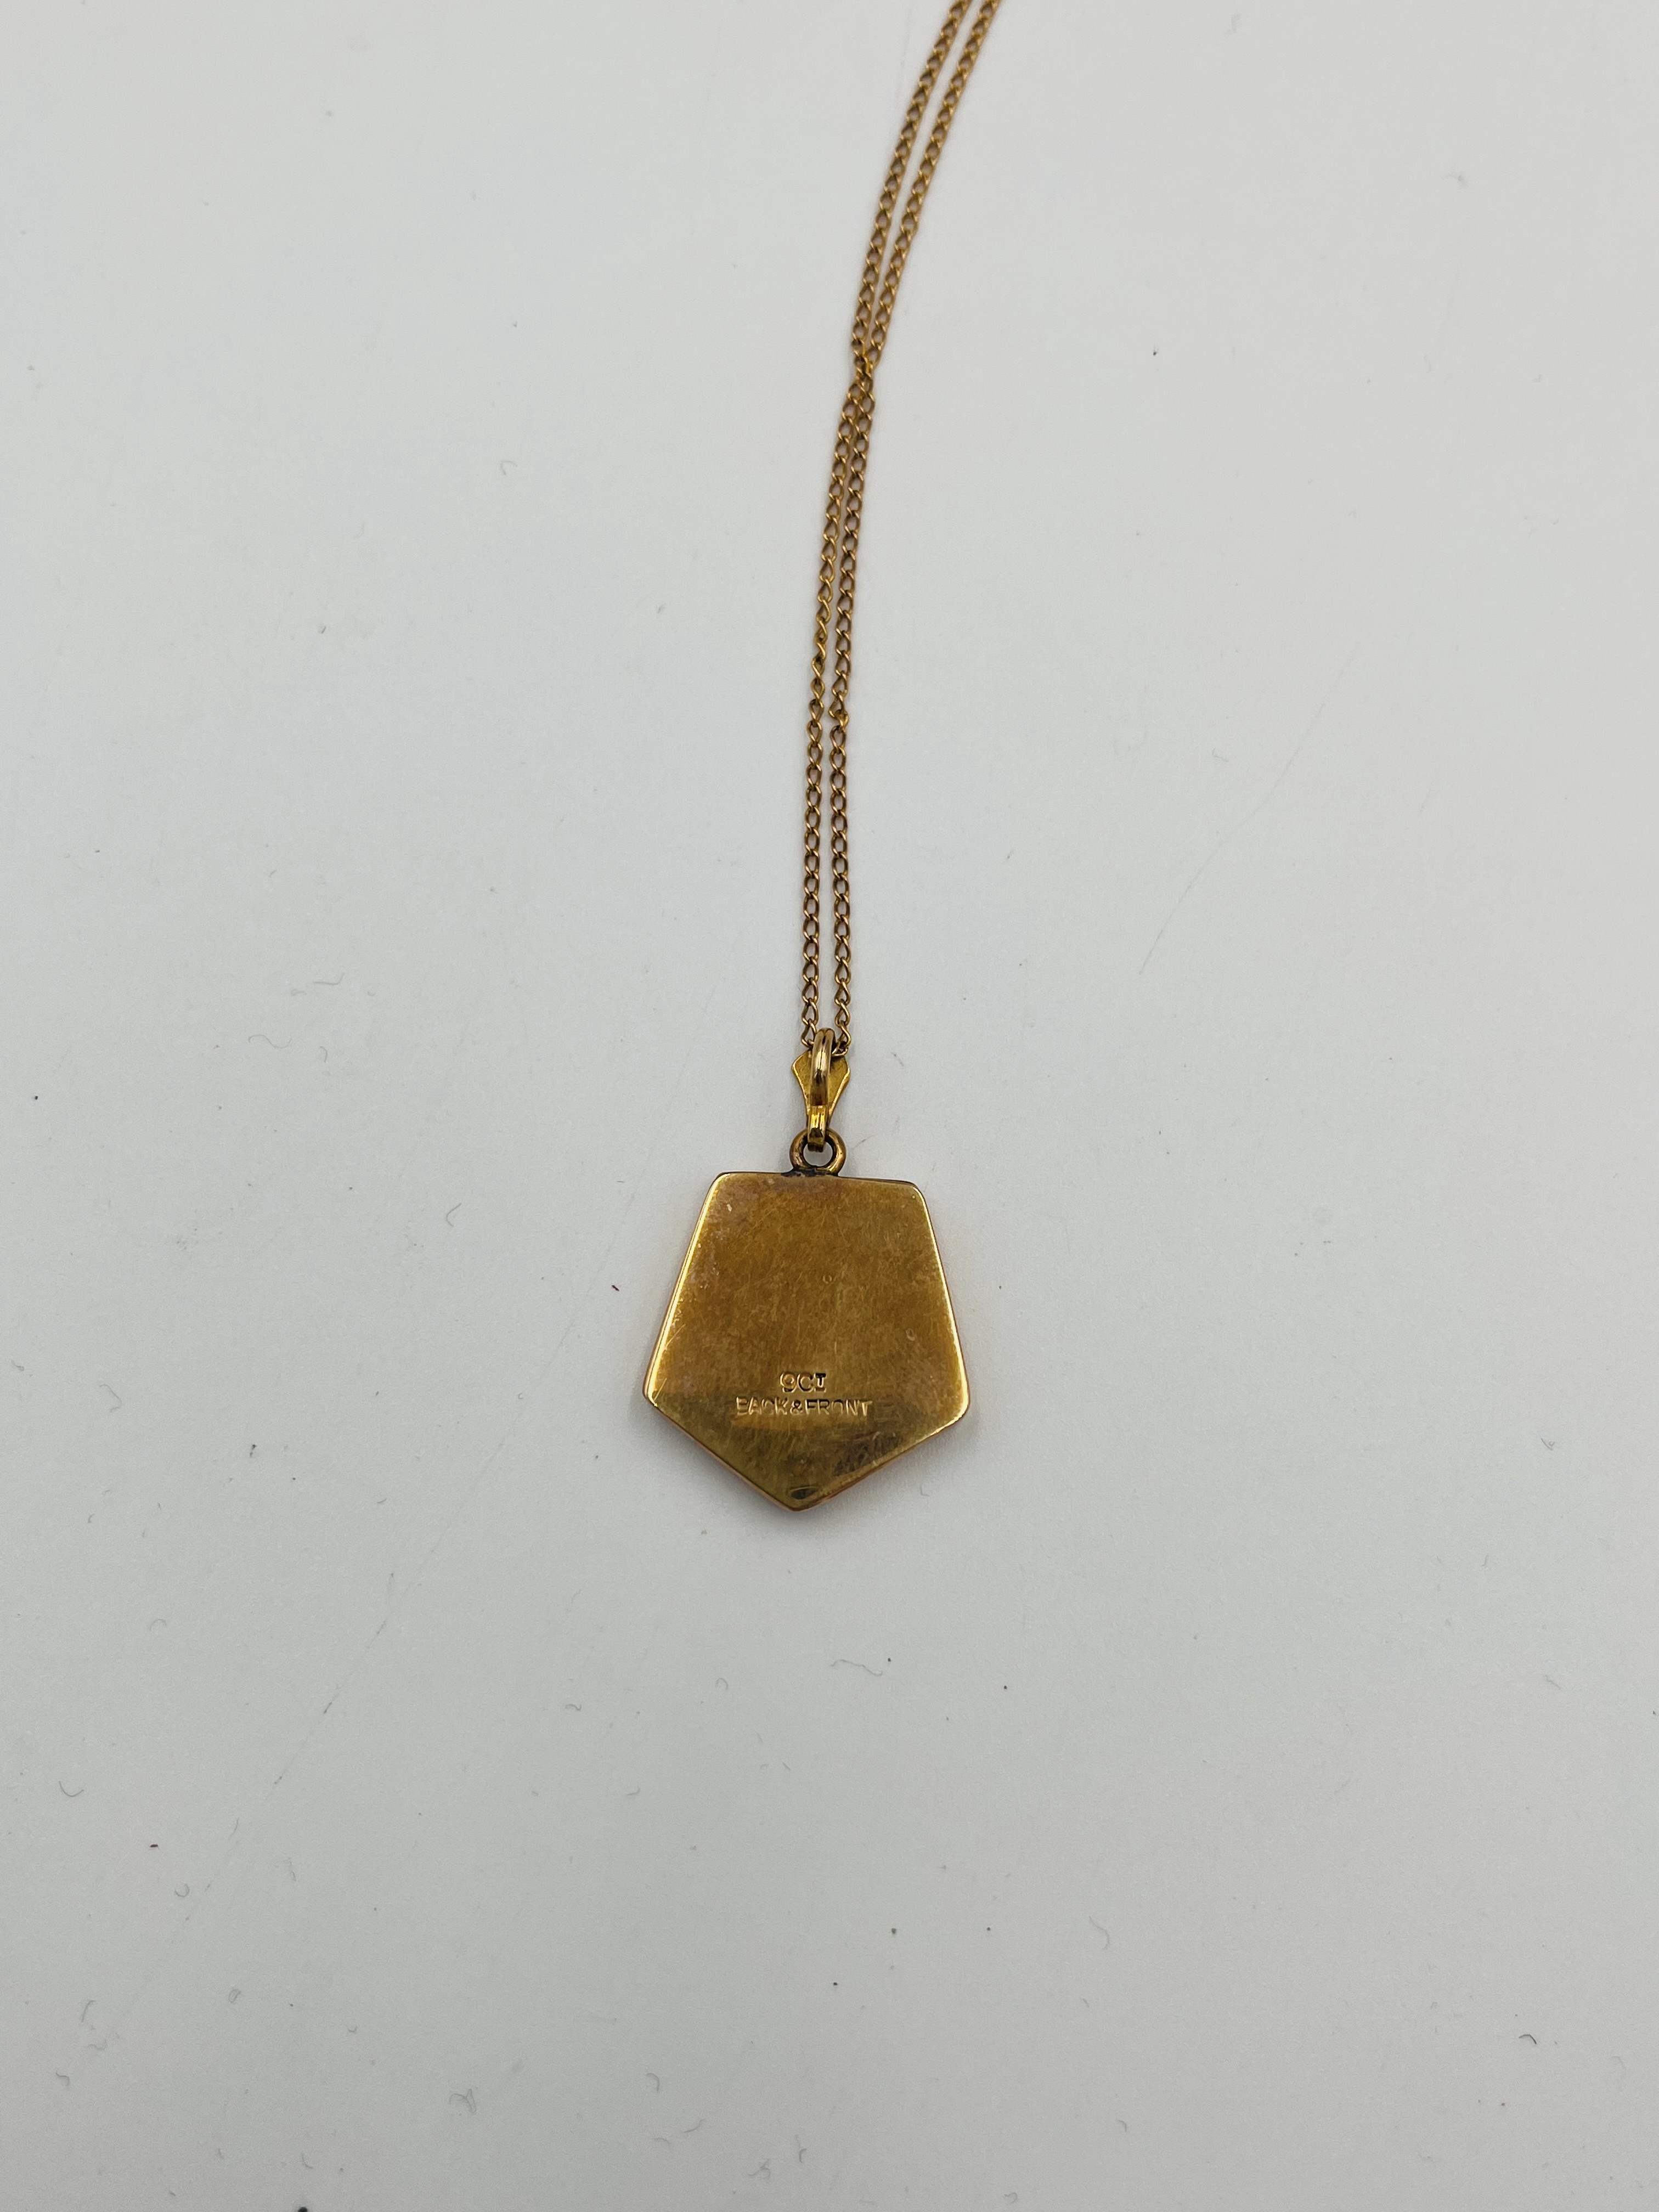 9ct gold locket on 9ct gold chain - Image 3 of 6